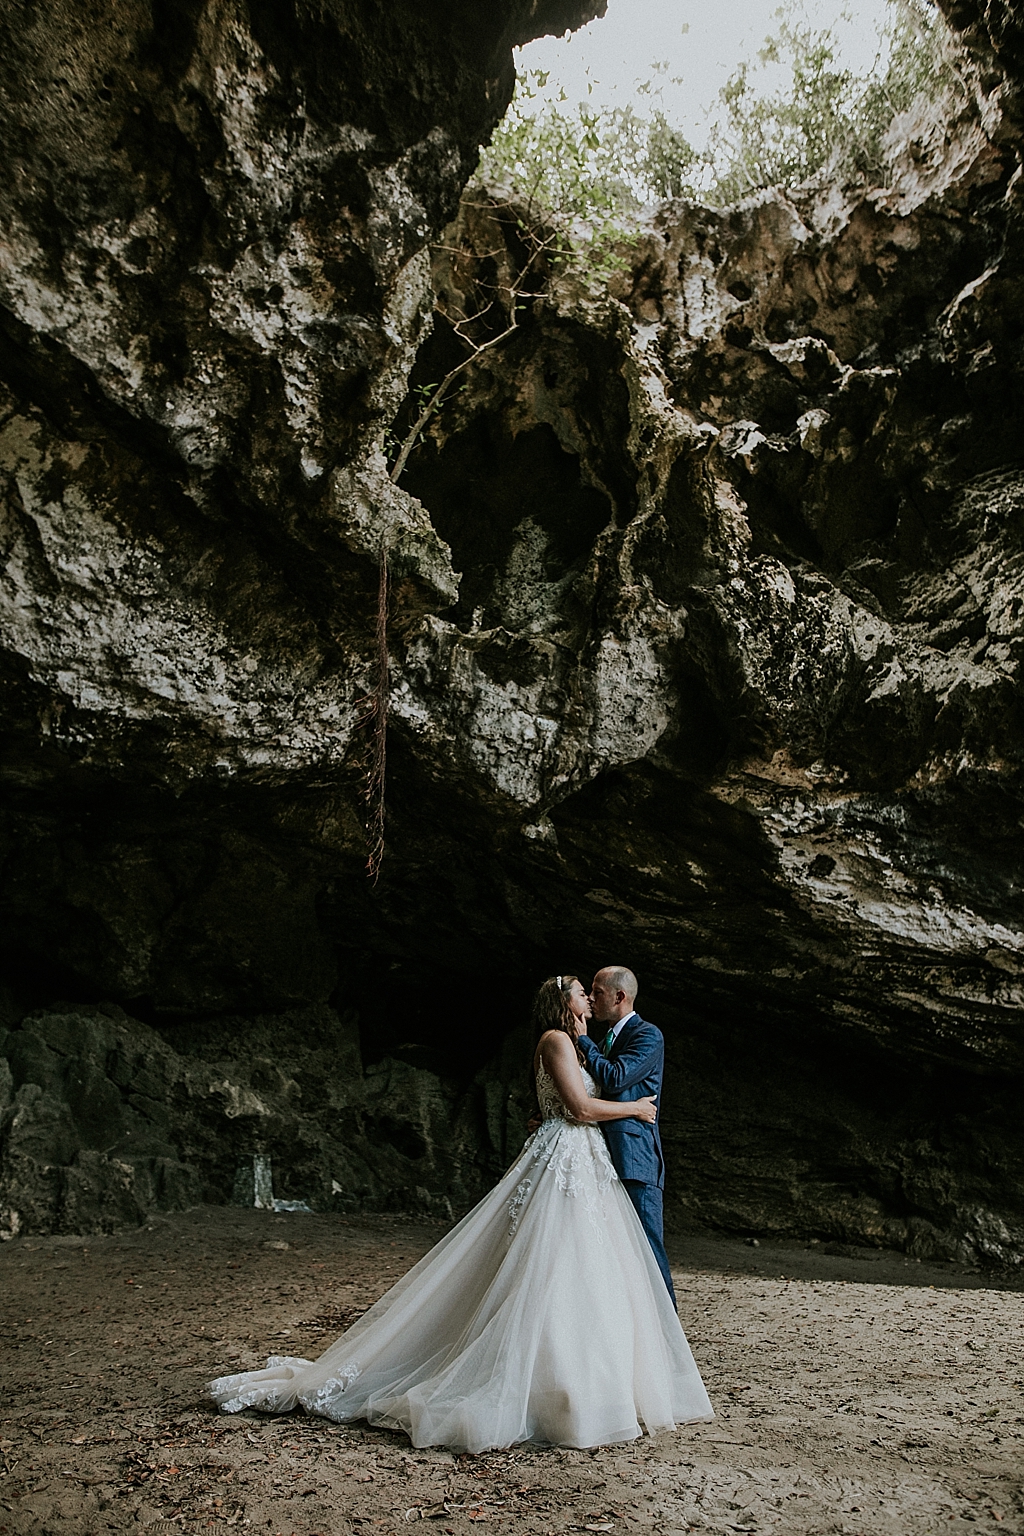 Wedding portraits in a cave